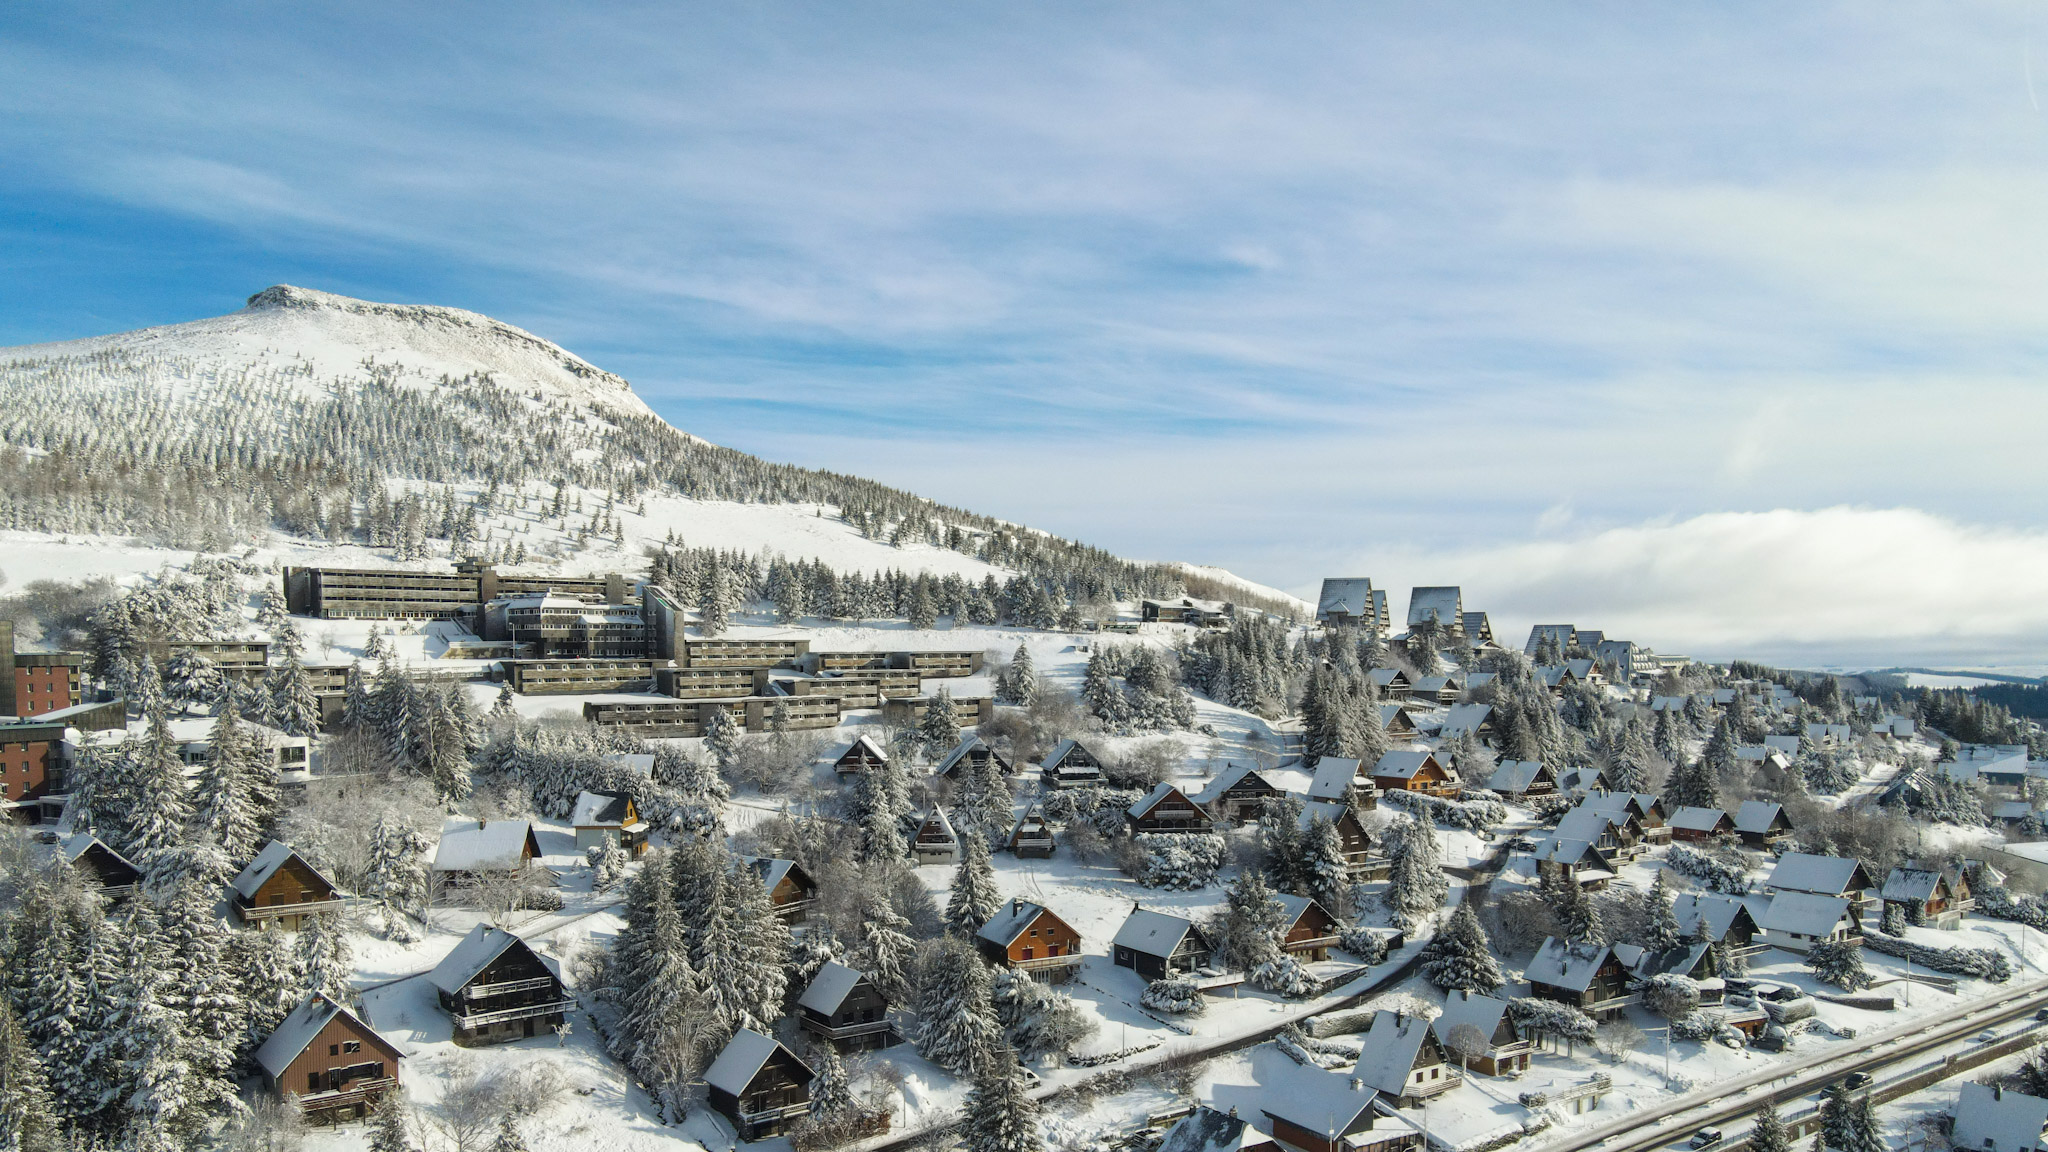 Super Besse seen from the sky under the snow, the slopes of the Puy du Chambourguet and the snow-covered Chalet Village